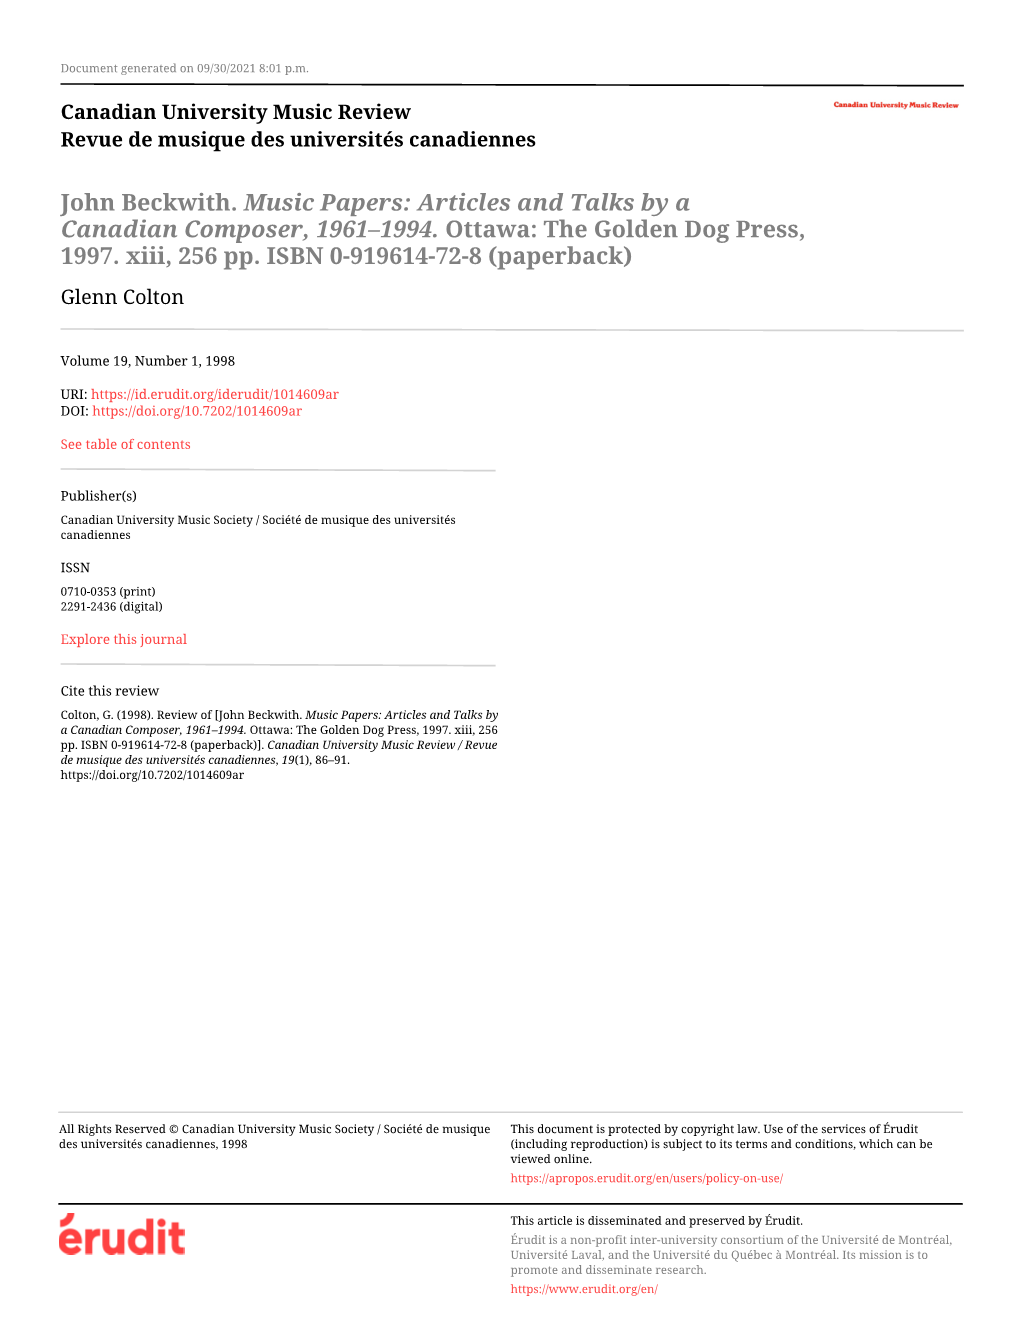 John Beckwith. Music Papers: Articles and Talks by a Canadian Composer, 1961–1994